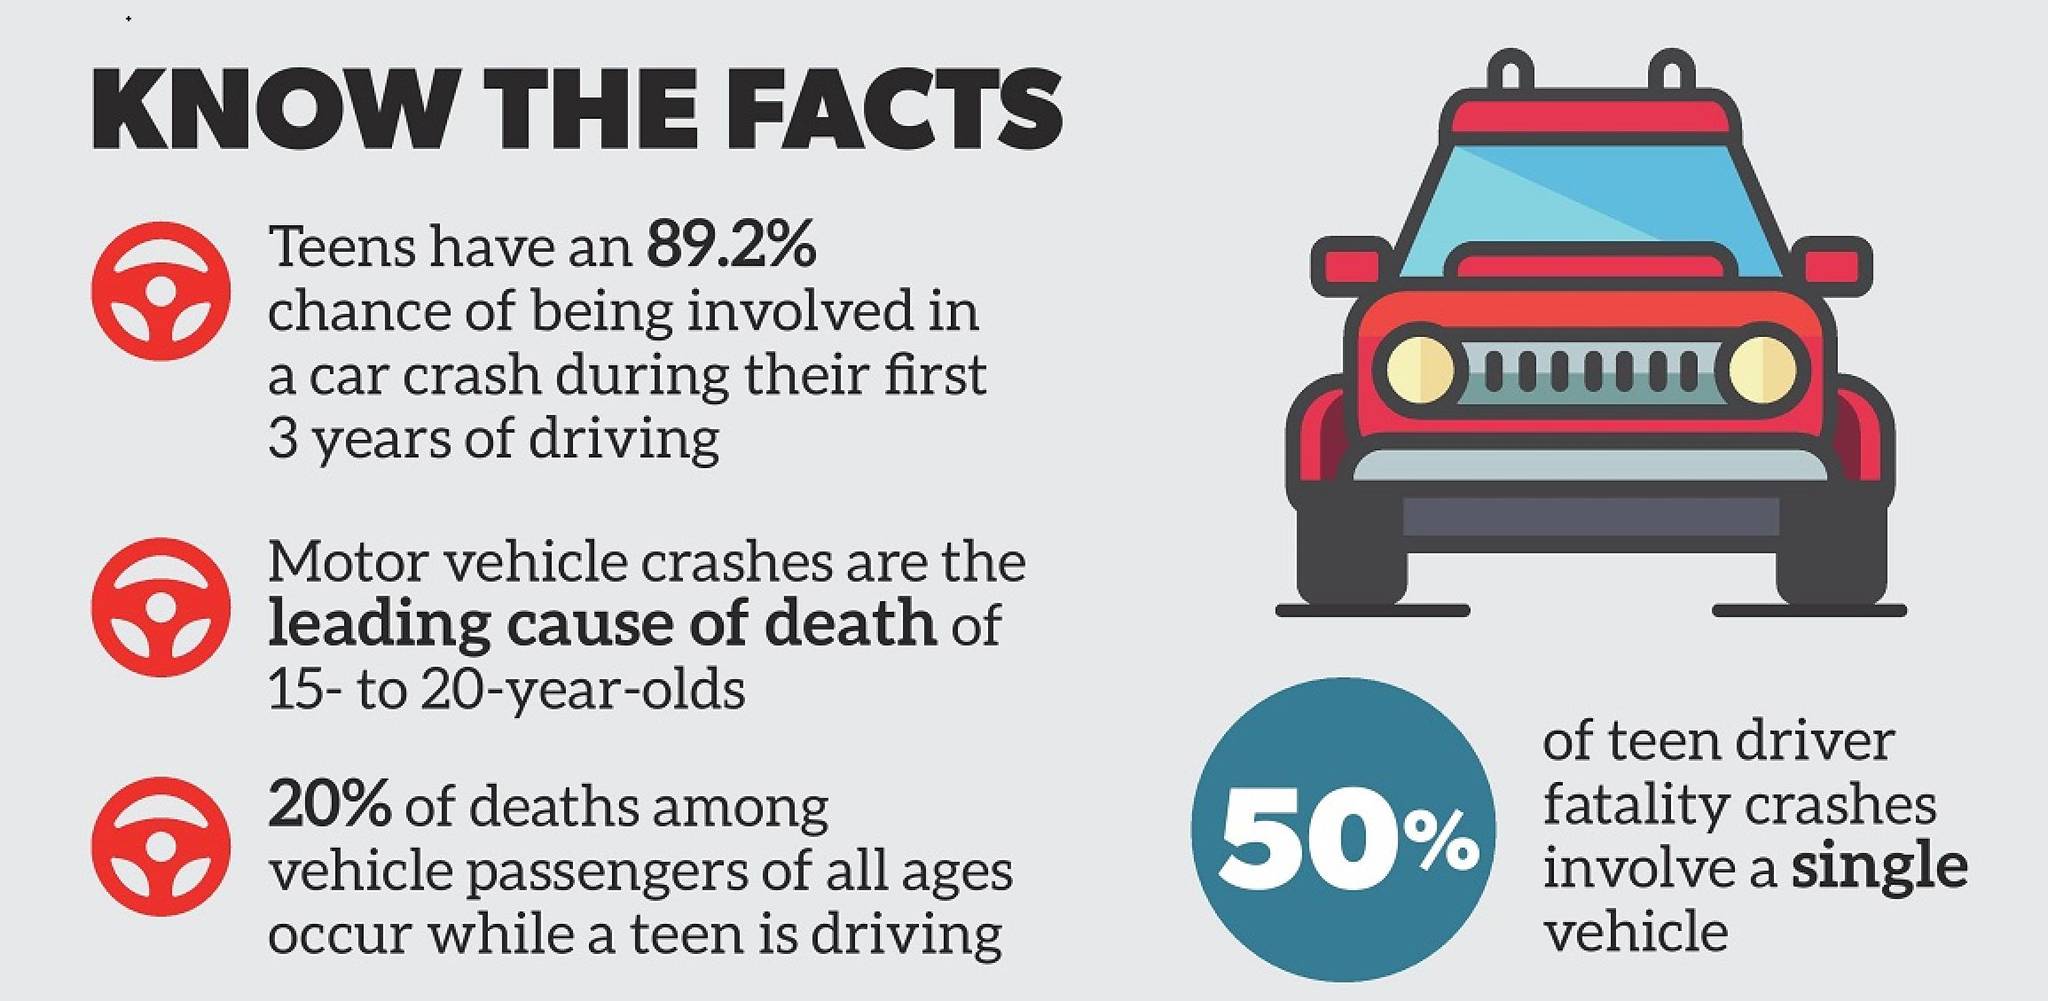 The 100 deadliest days: Keeping teens safe on the road